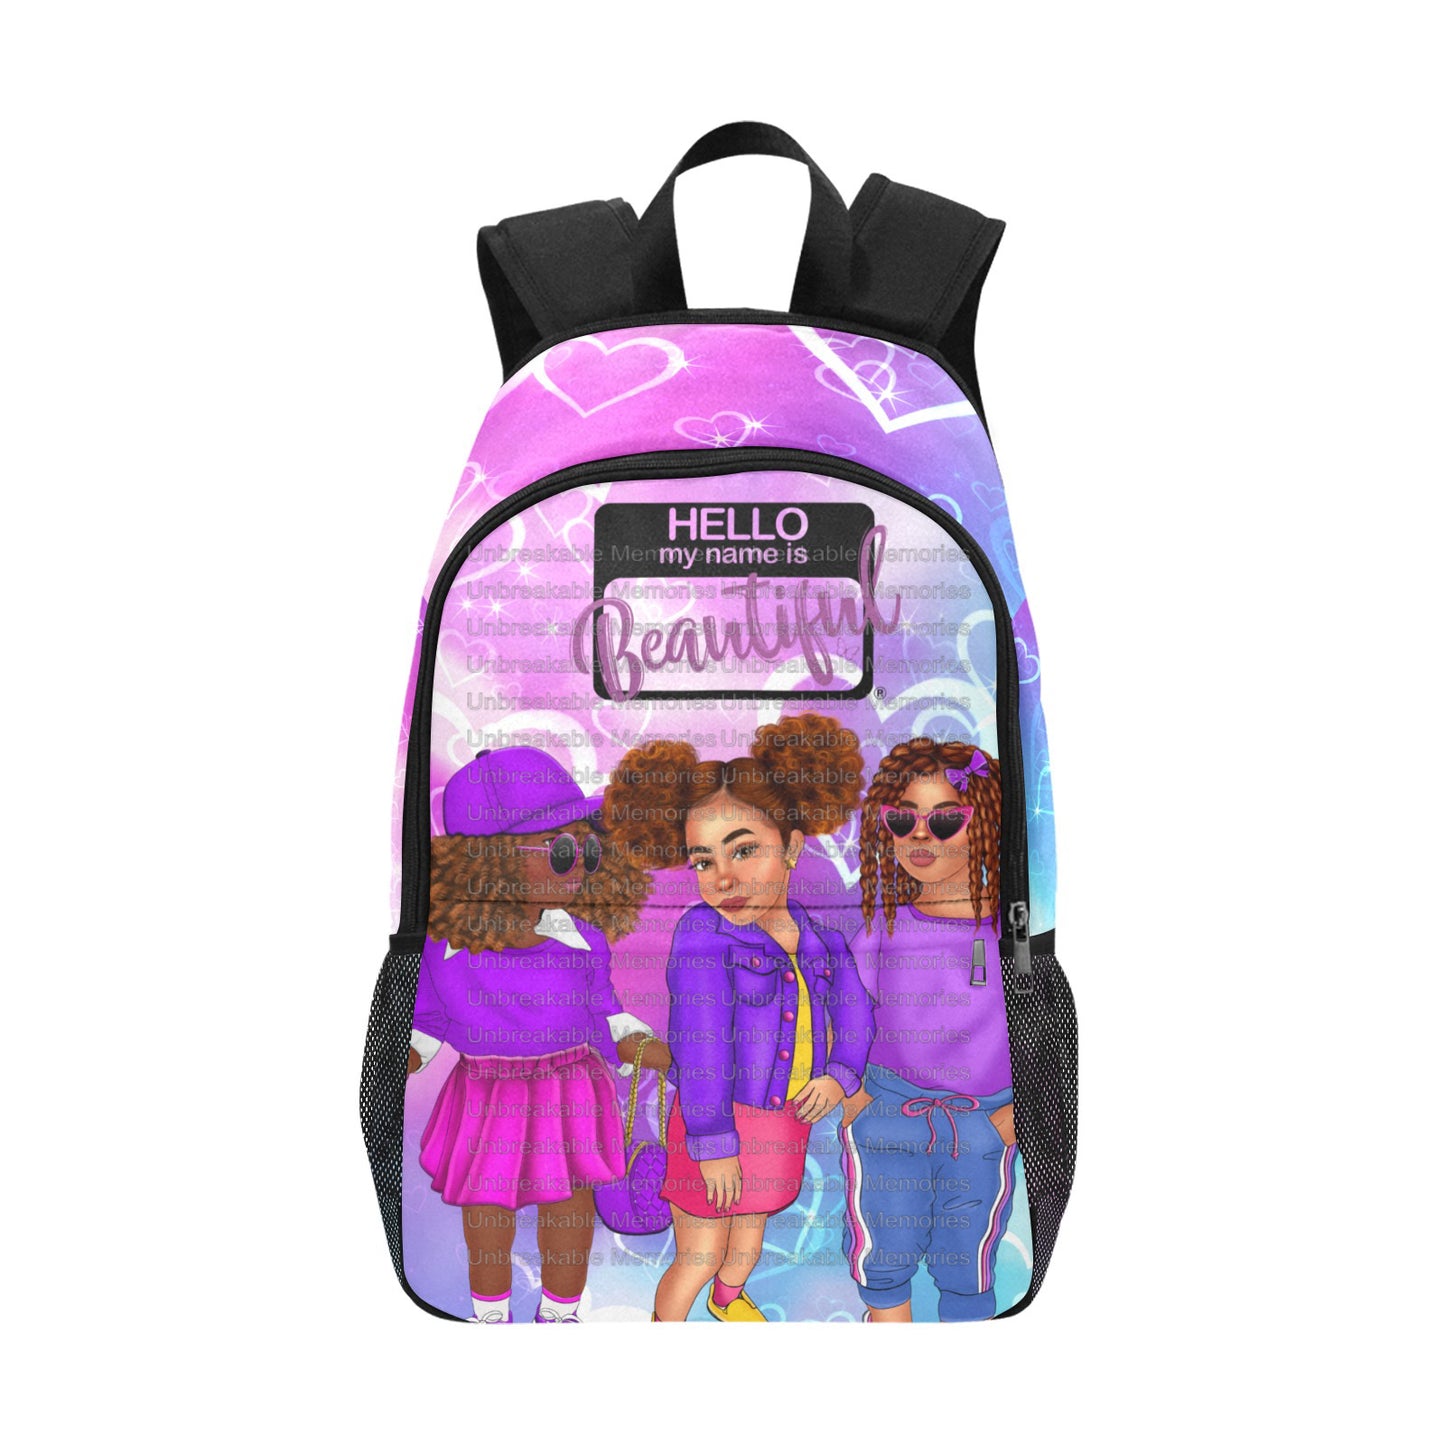 Hello Beautiful Girls Backpack with mesh side pockets